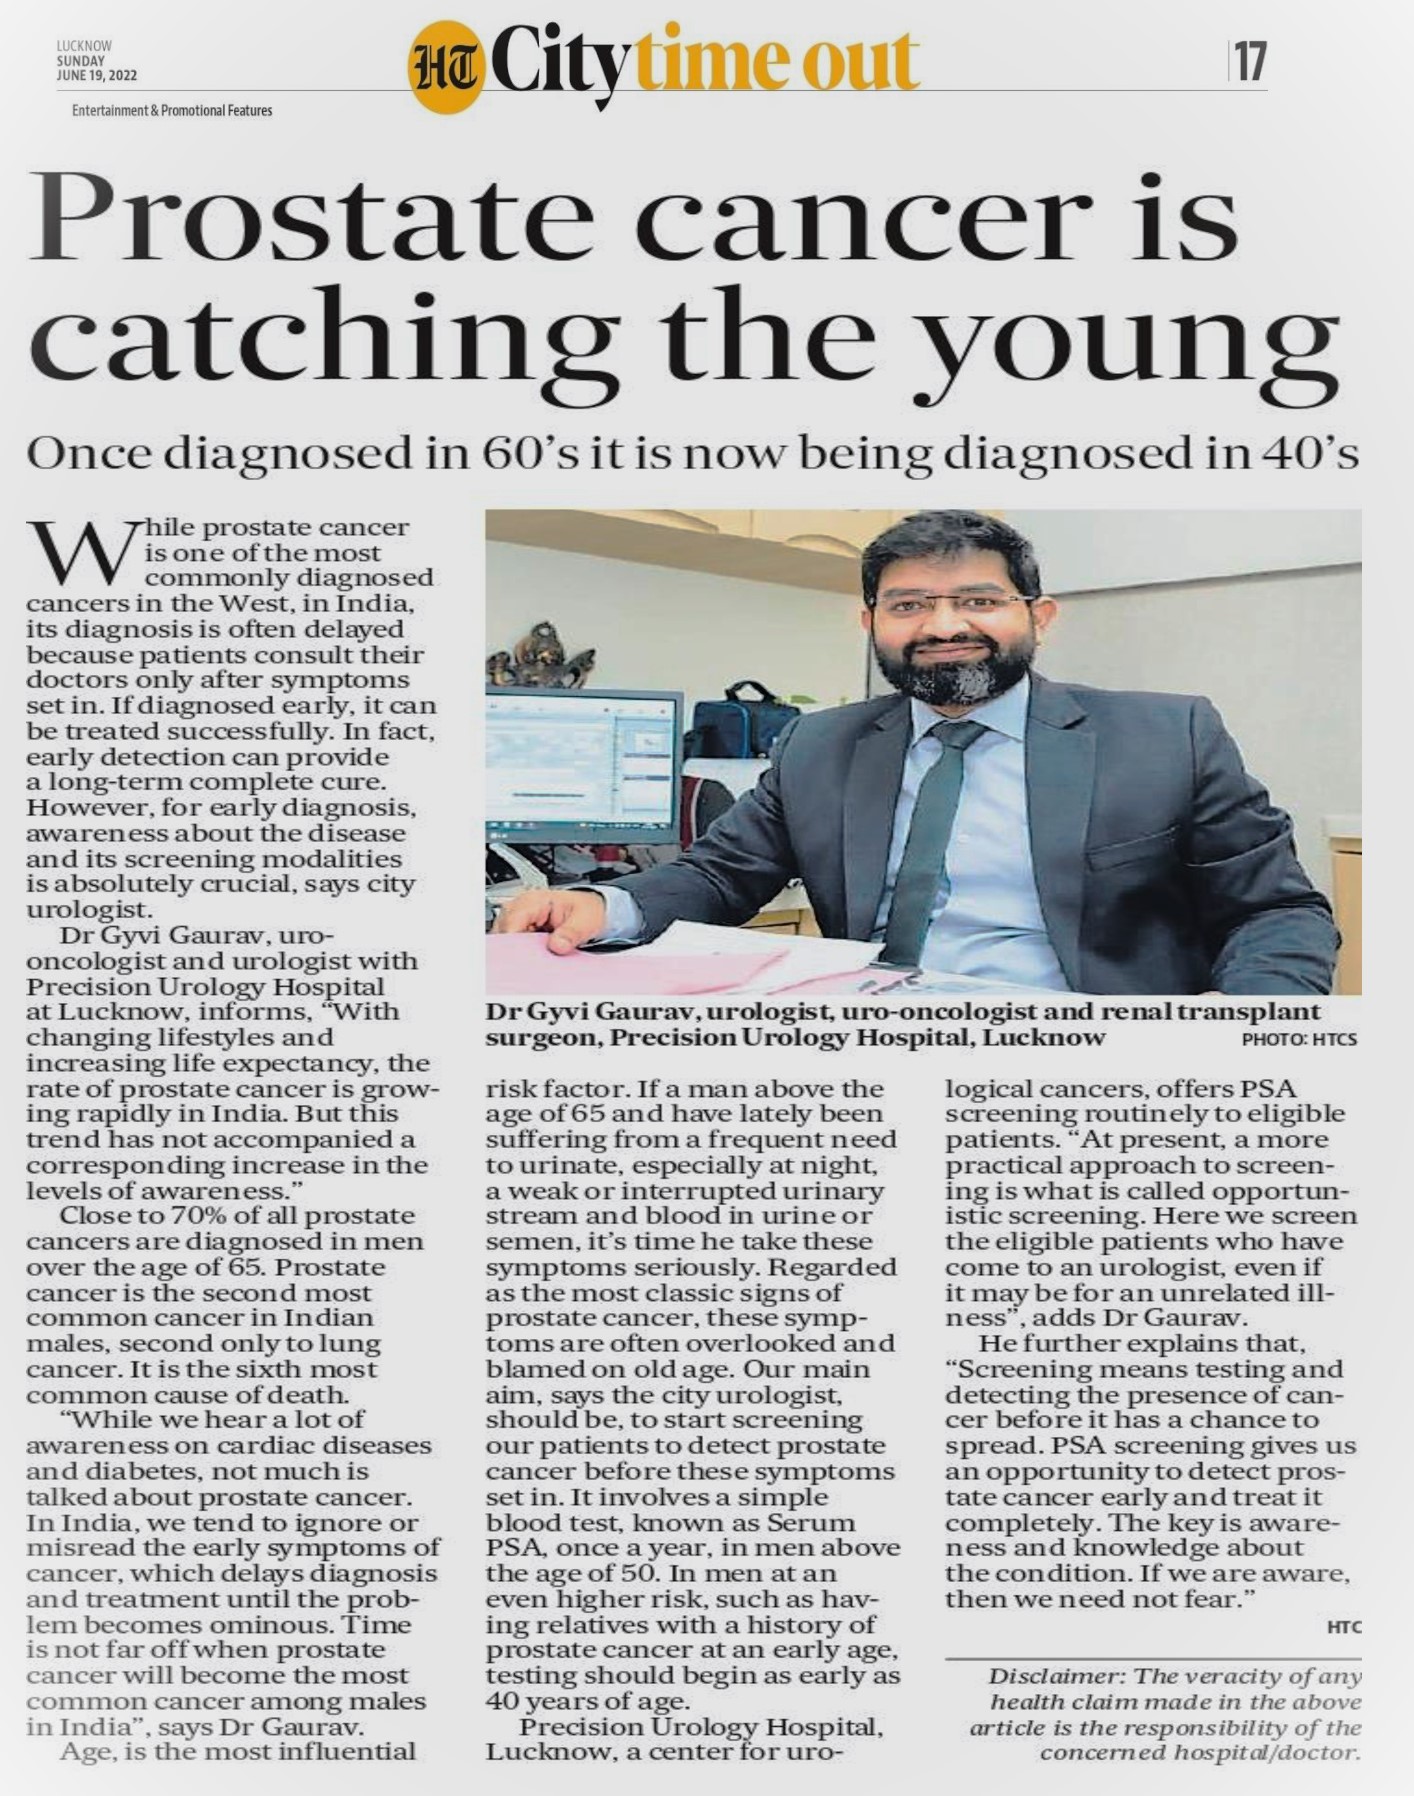 Article on Prostate cancer : Dr. Gyvi Gaurav published in Hindustan times